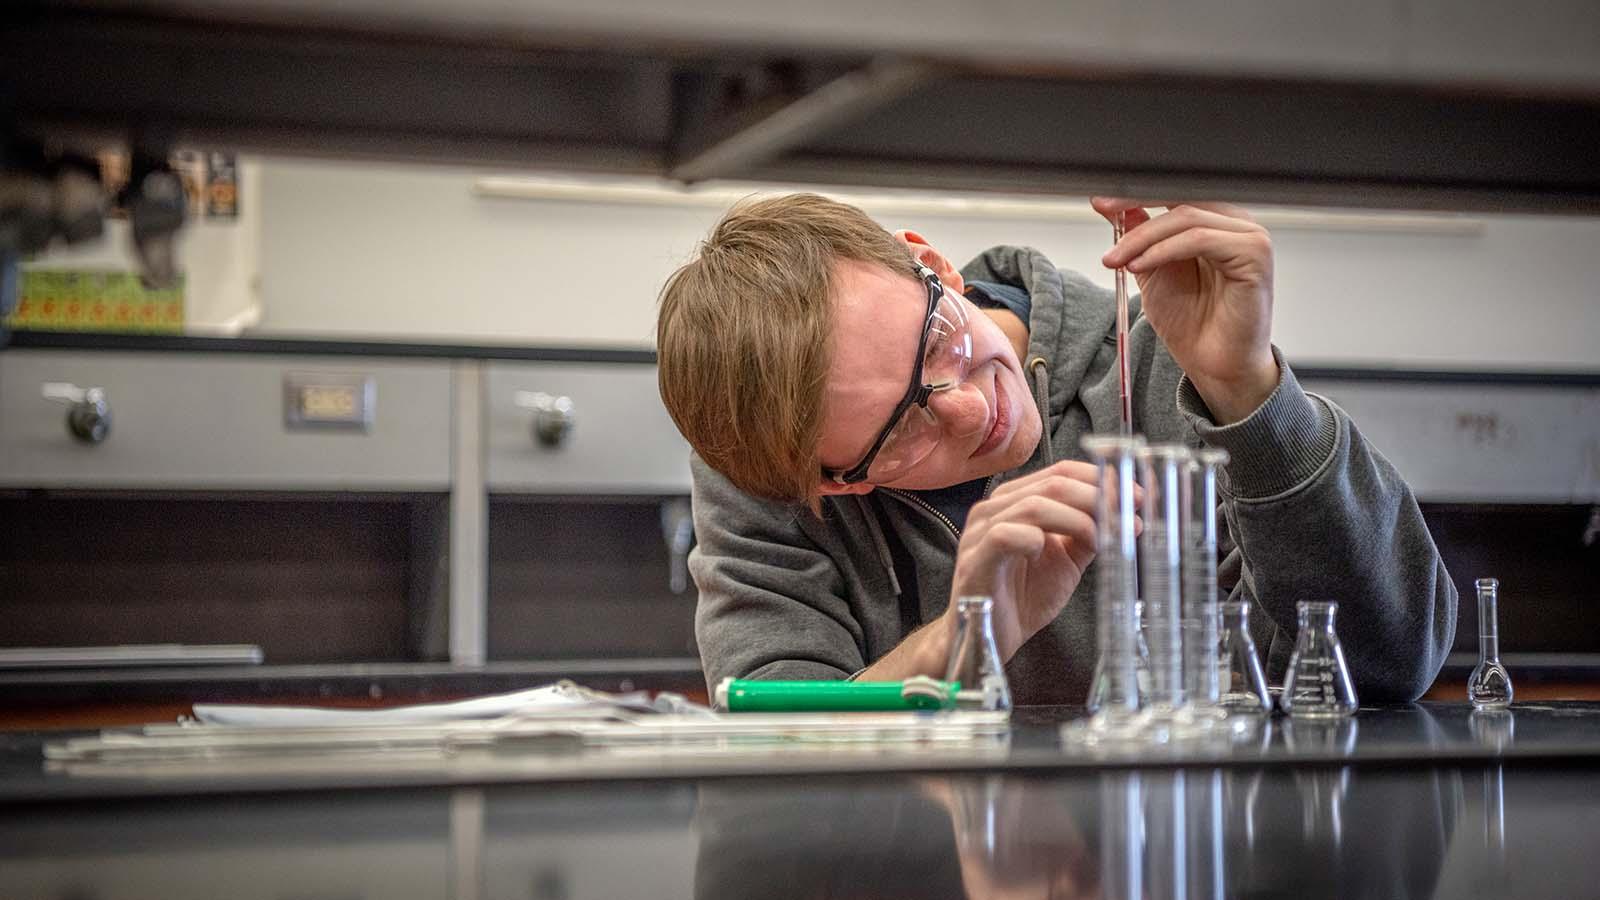 Male student with protective goggles adding chemicals to a beaker